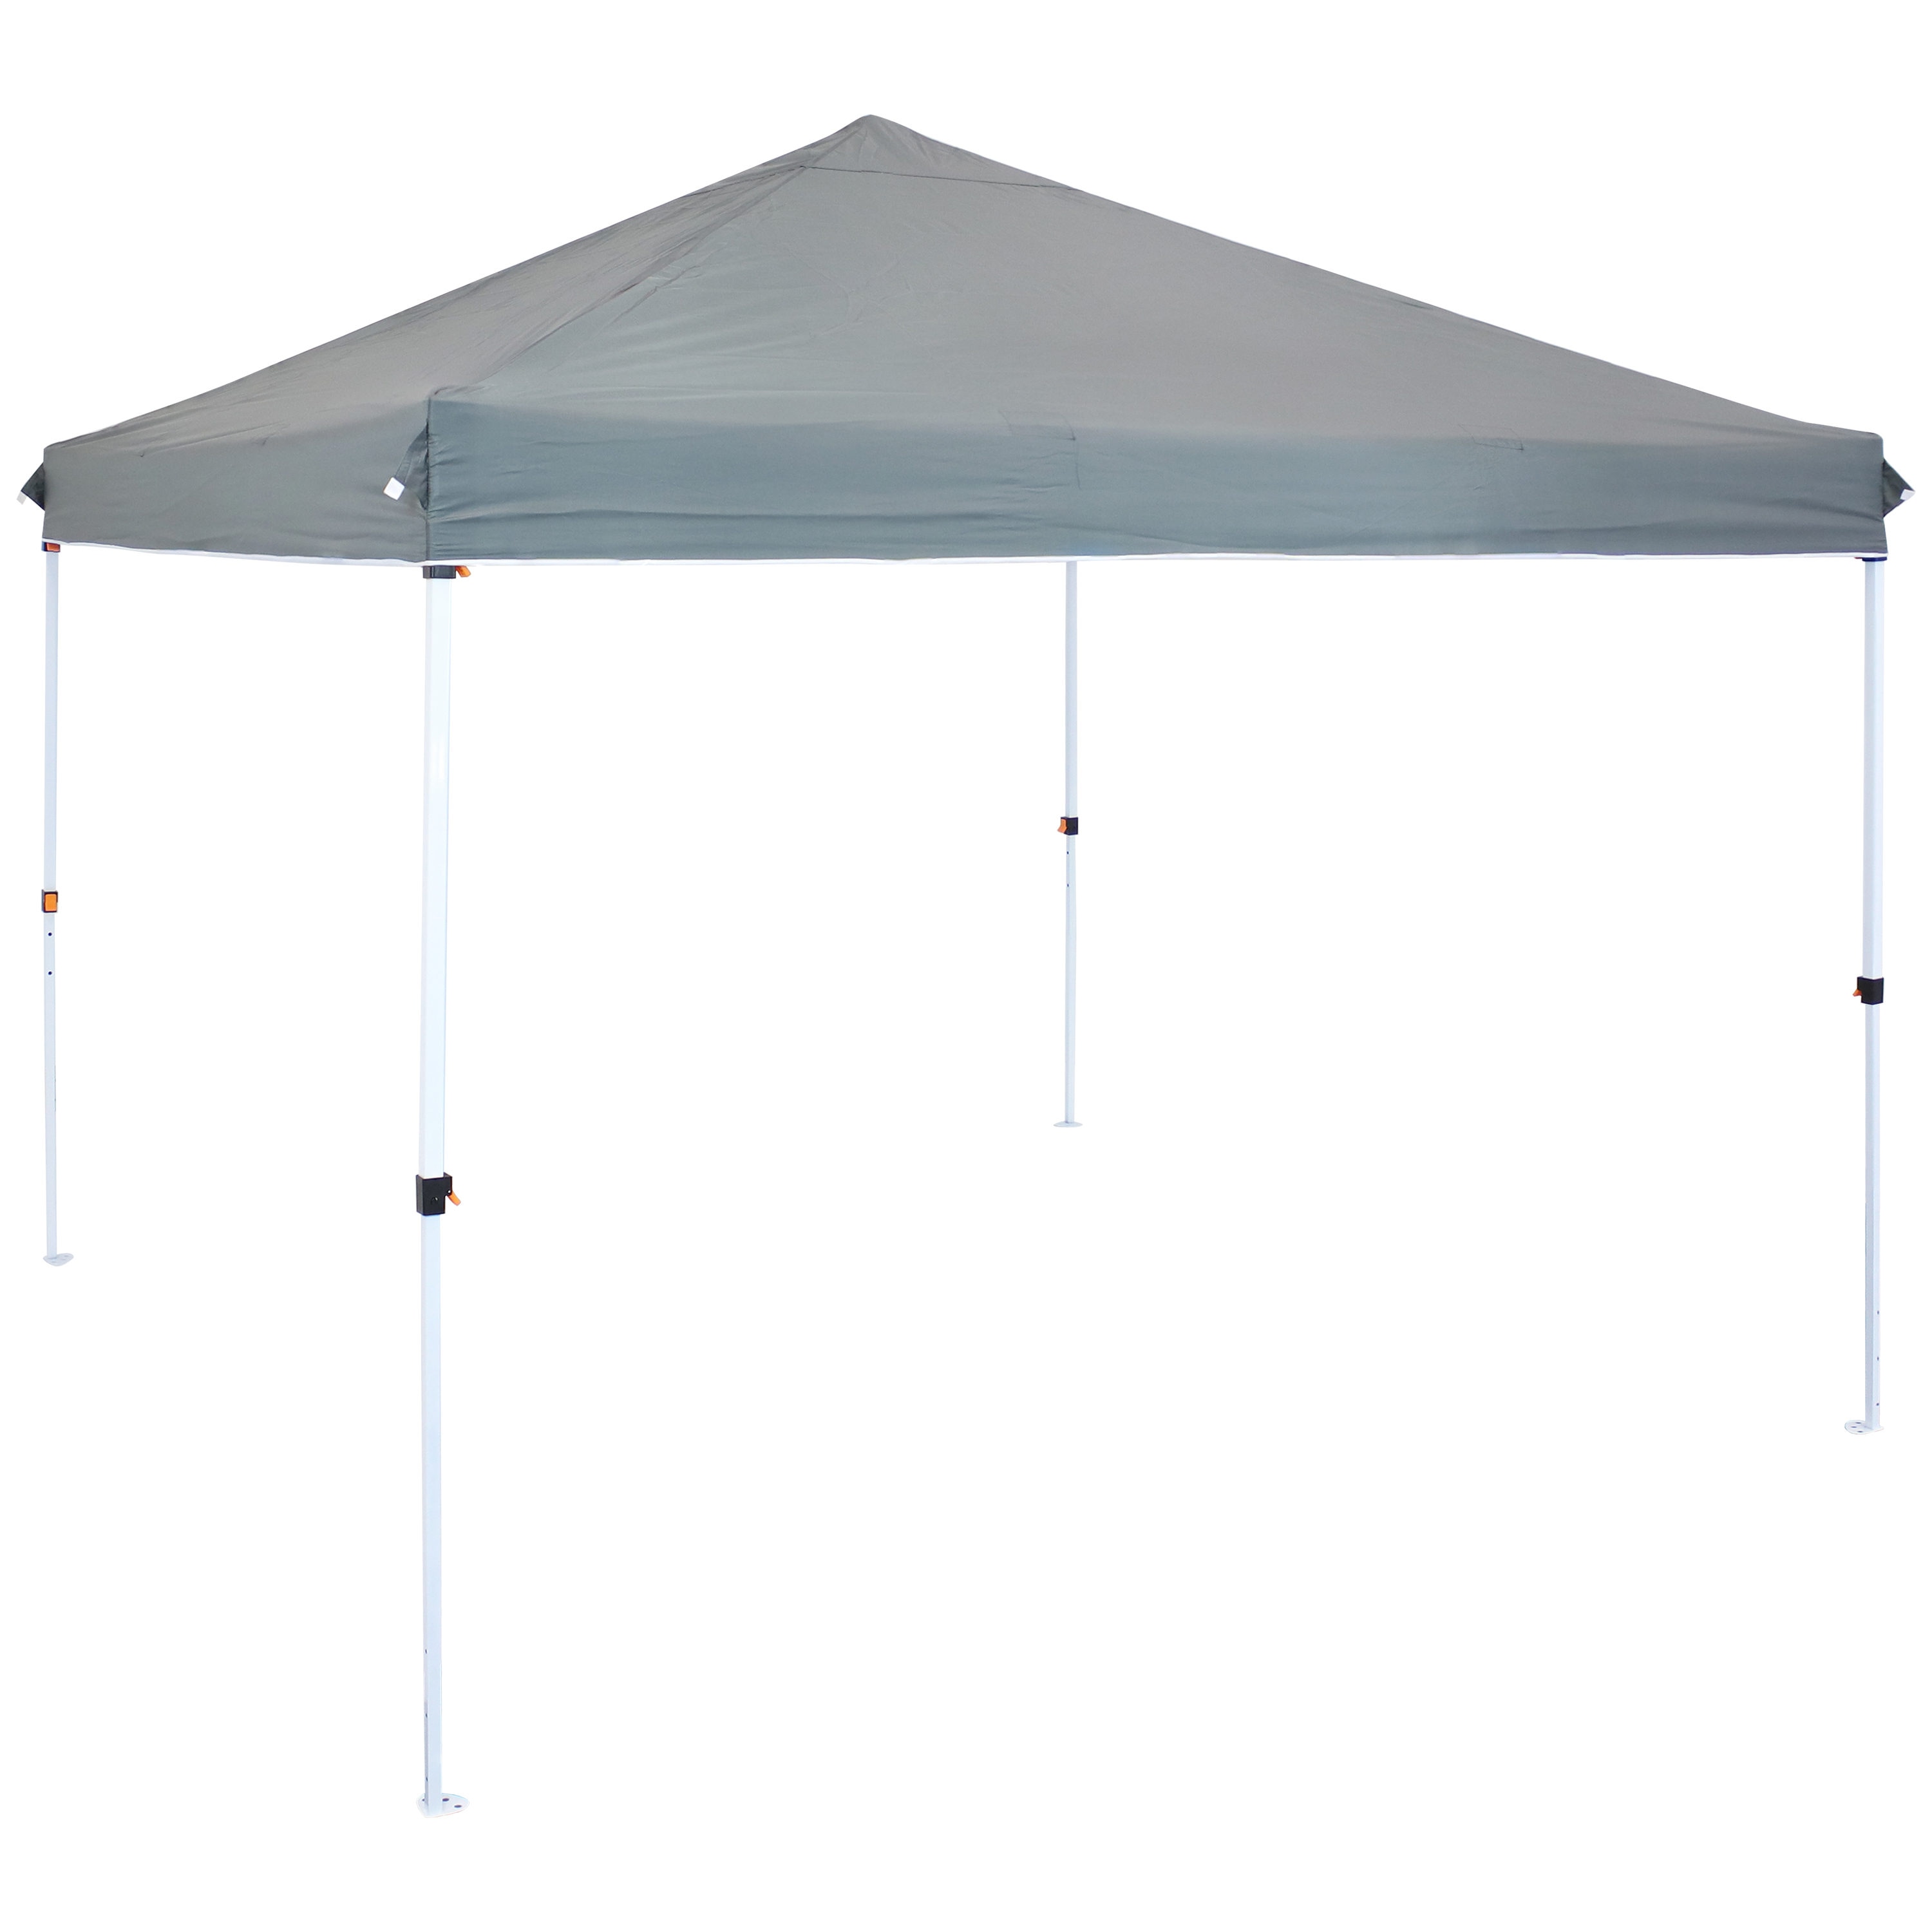 Sunnydaze Decor 12-ft x 12-ft Square Grey Pop-up Canopy in the 